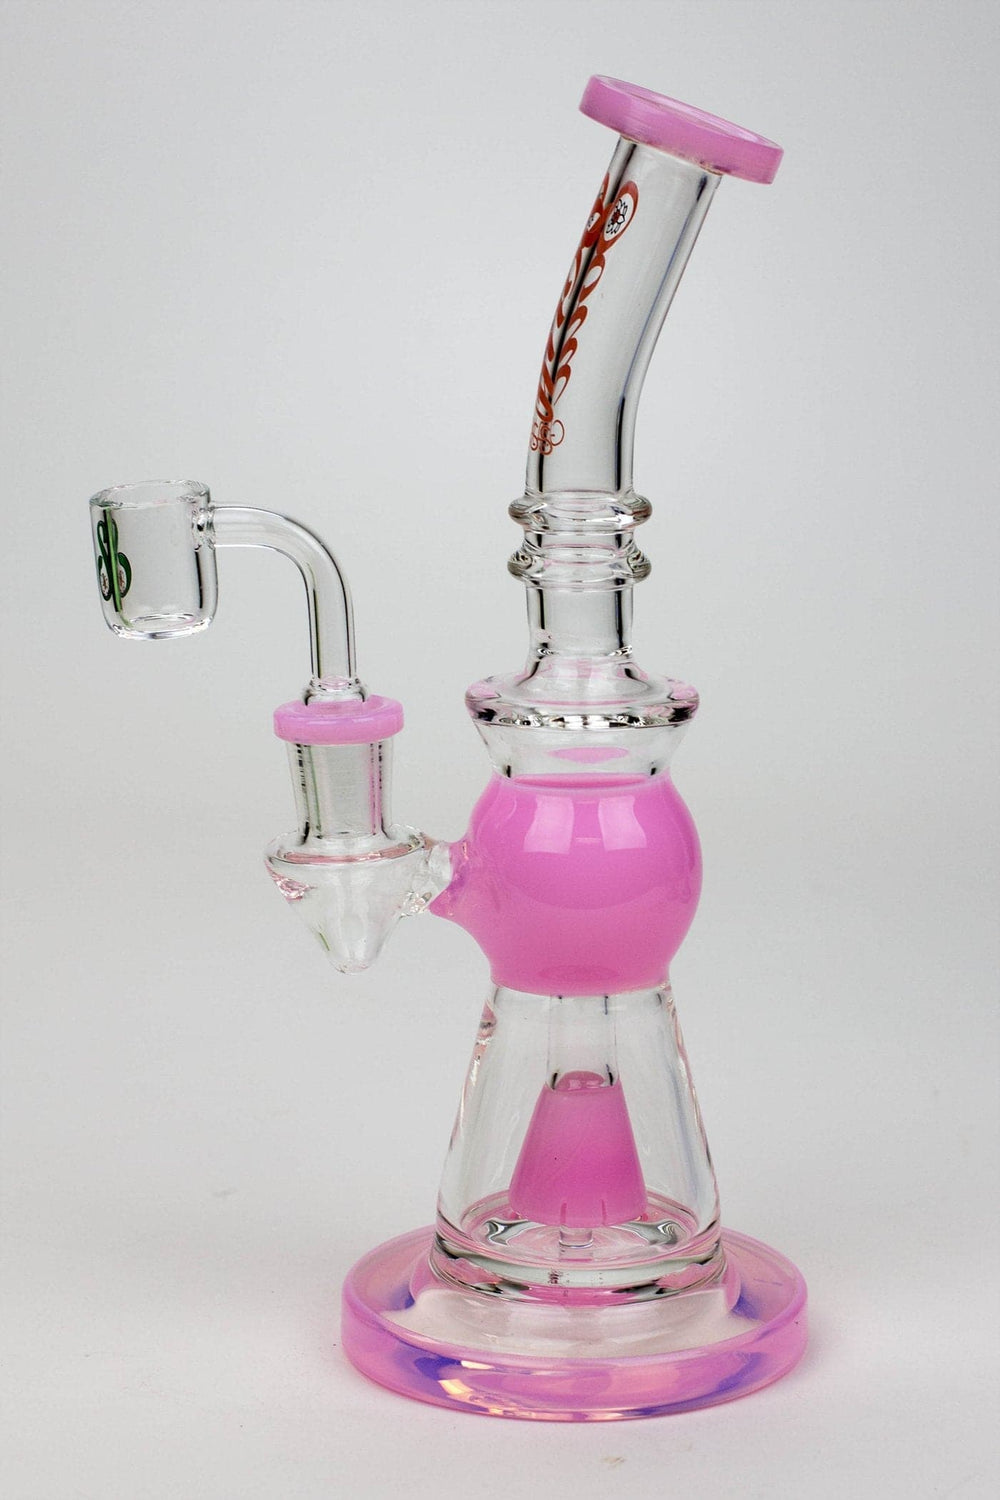 Soul glass 2-in-1 cone diffuser glass water pipes_1